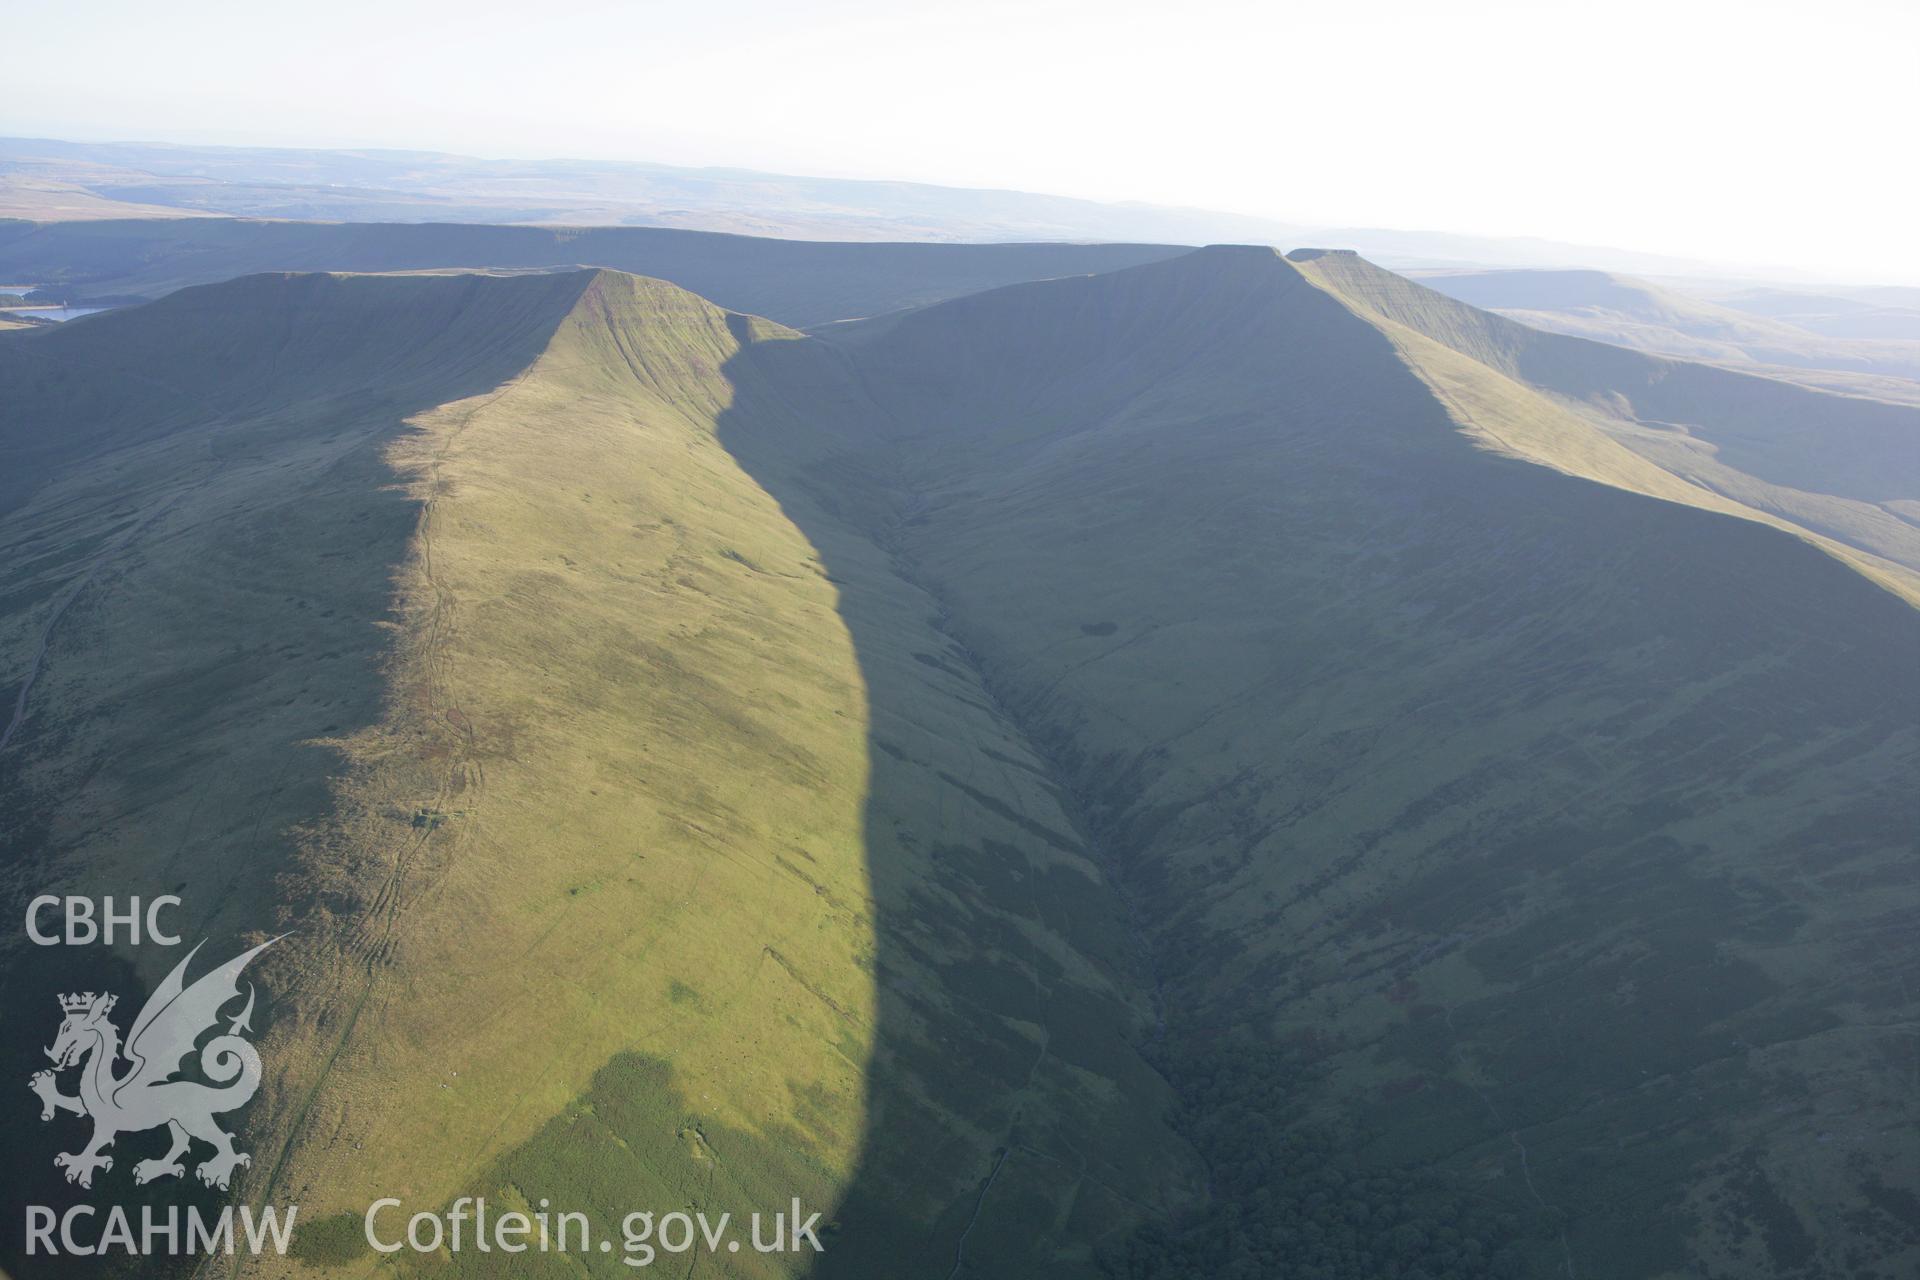 RCAHMW colour oblique aerial photograph of Corn Du and Pen y Fan, Brecon Beacons. Taken on 08 August 2007 by Toby Driver